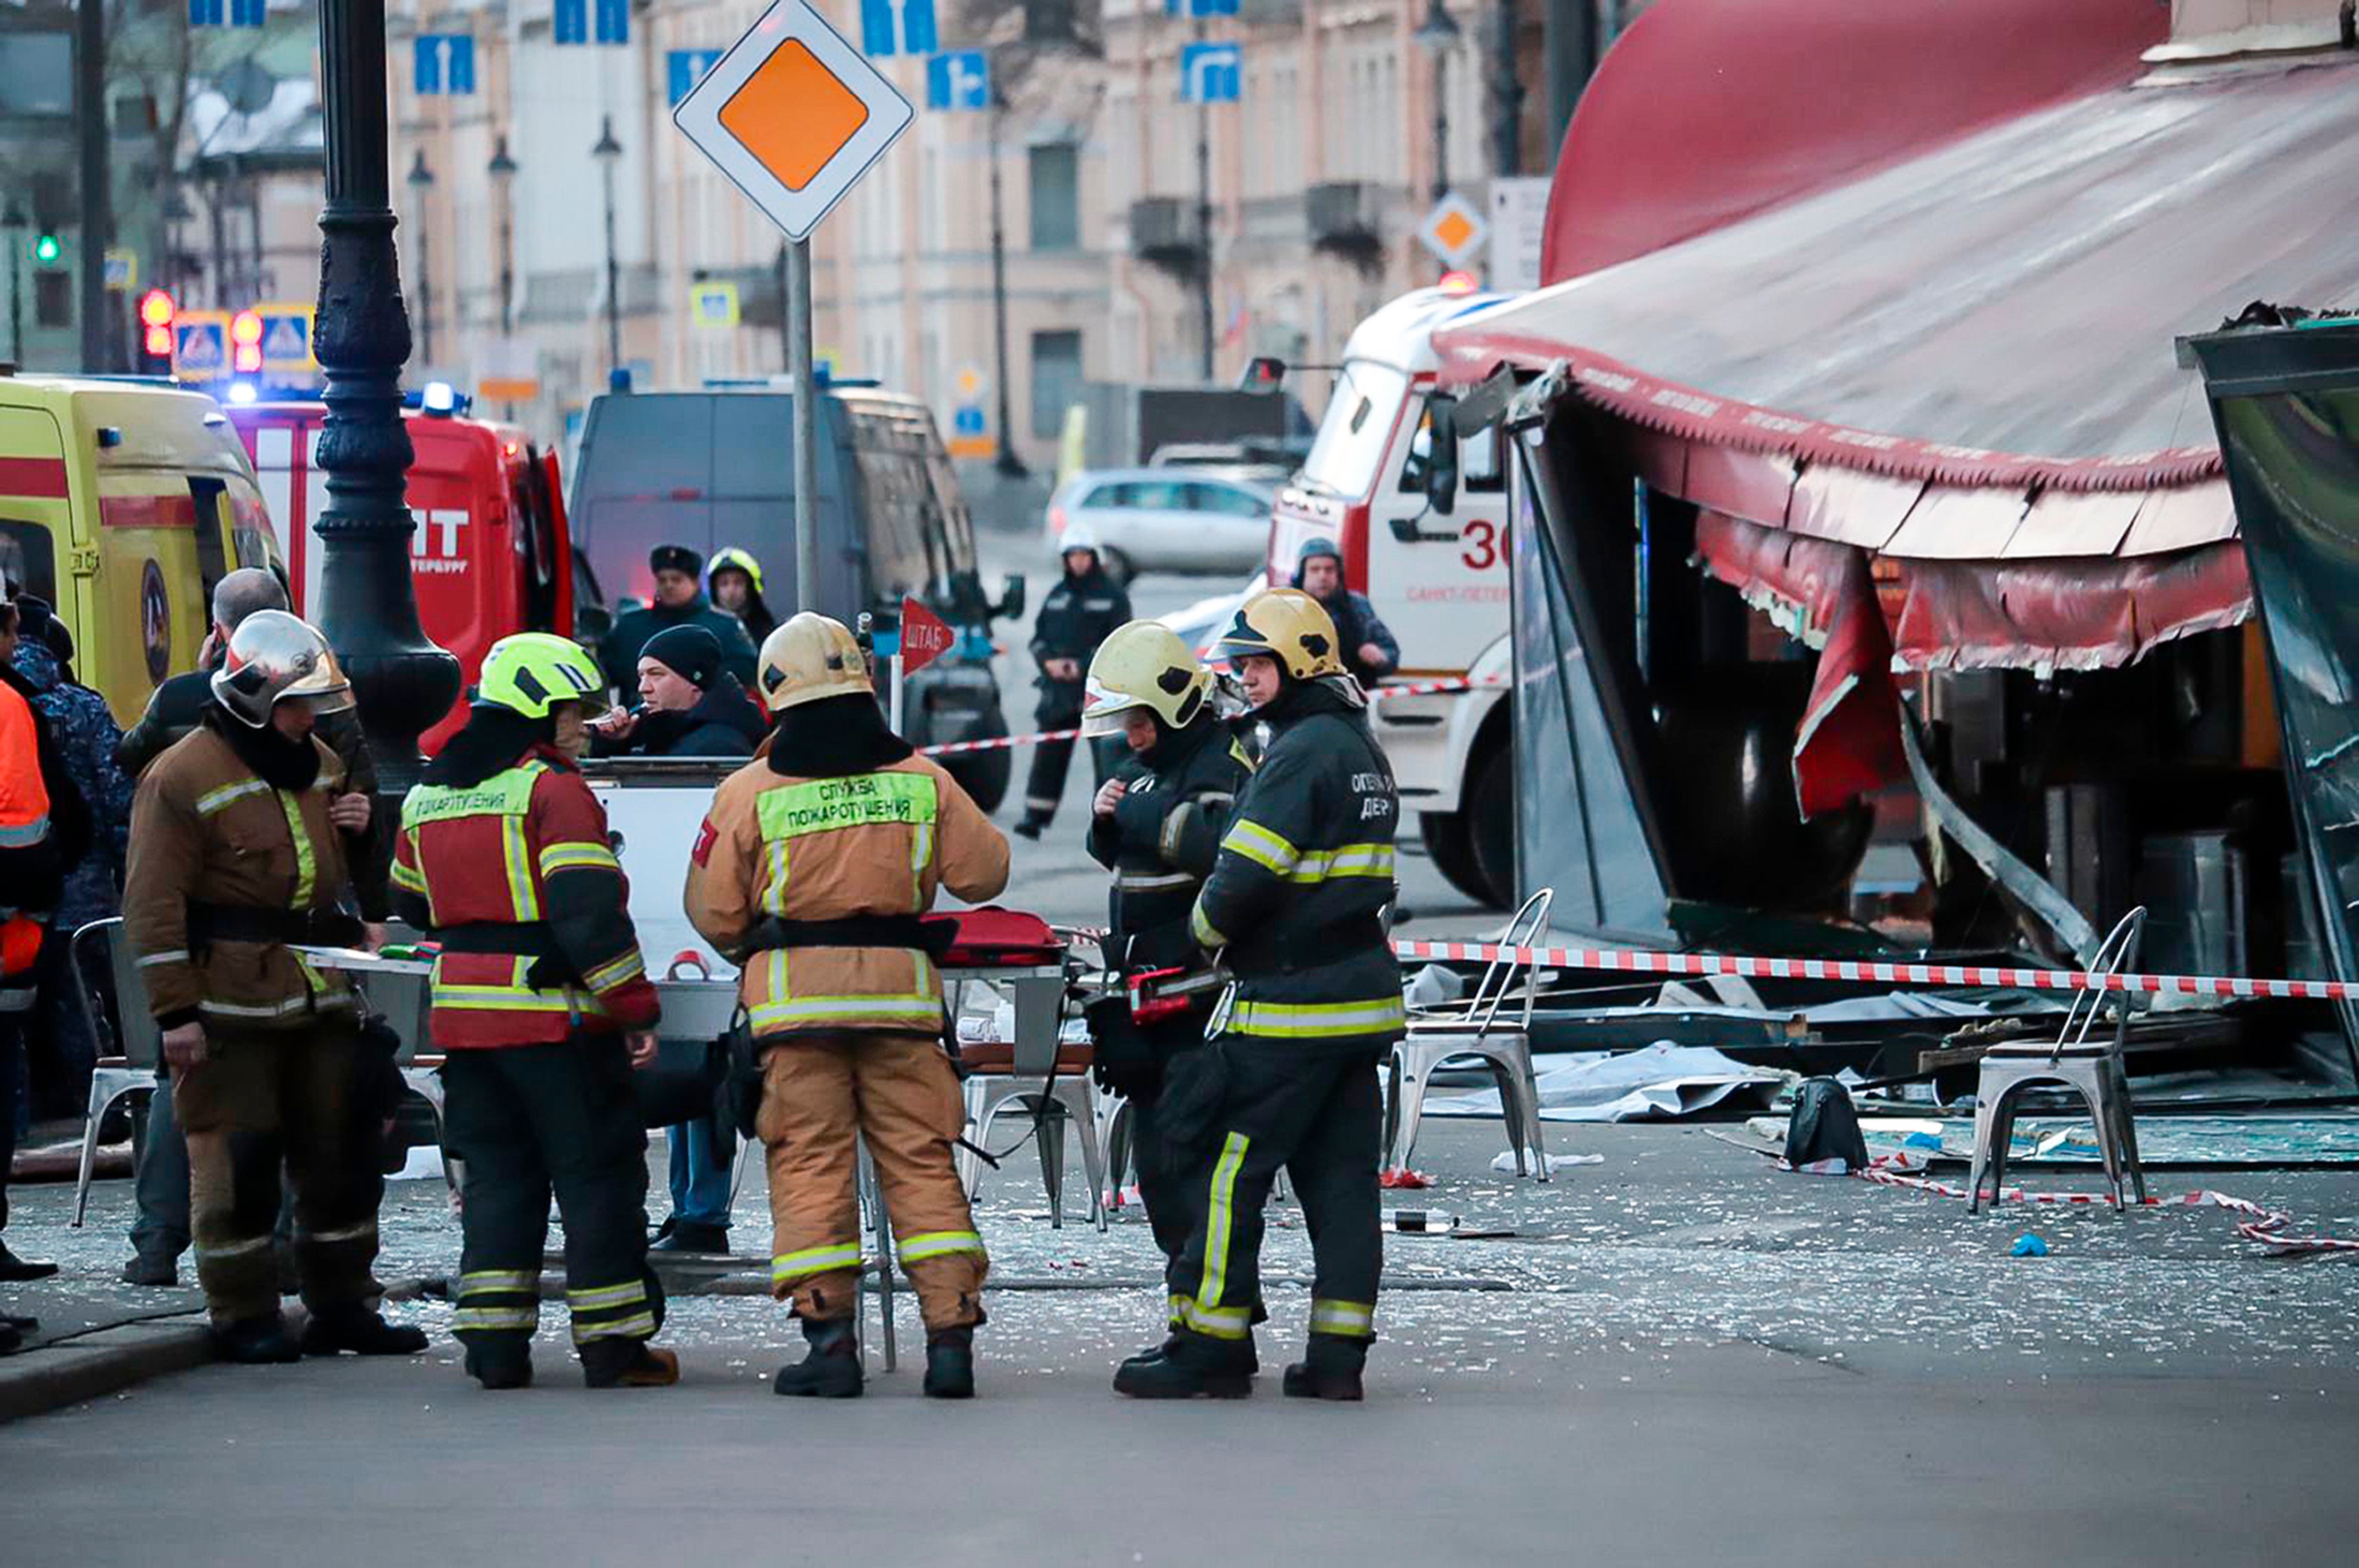 Russian Emergency Situations Ministry stand at the side of an explosion at a cafe in St. Petersburg, Russia